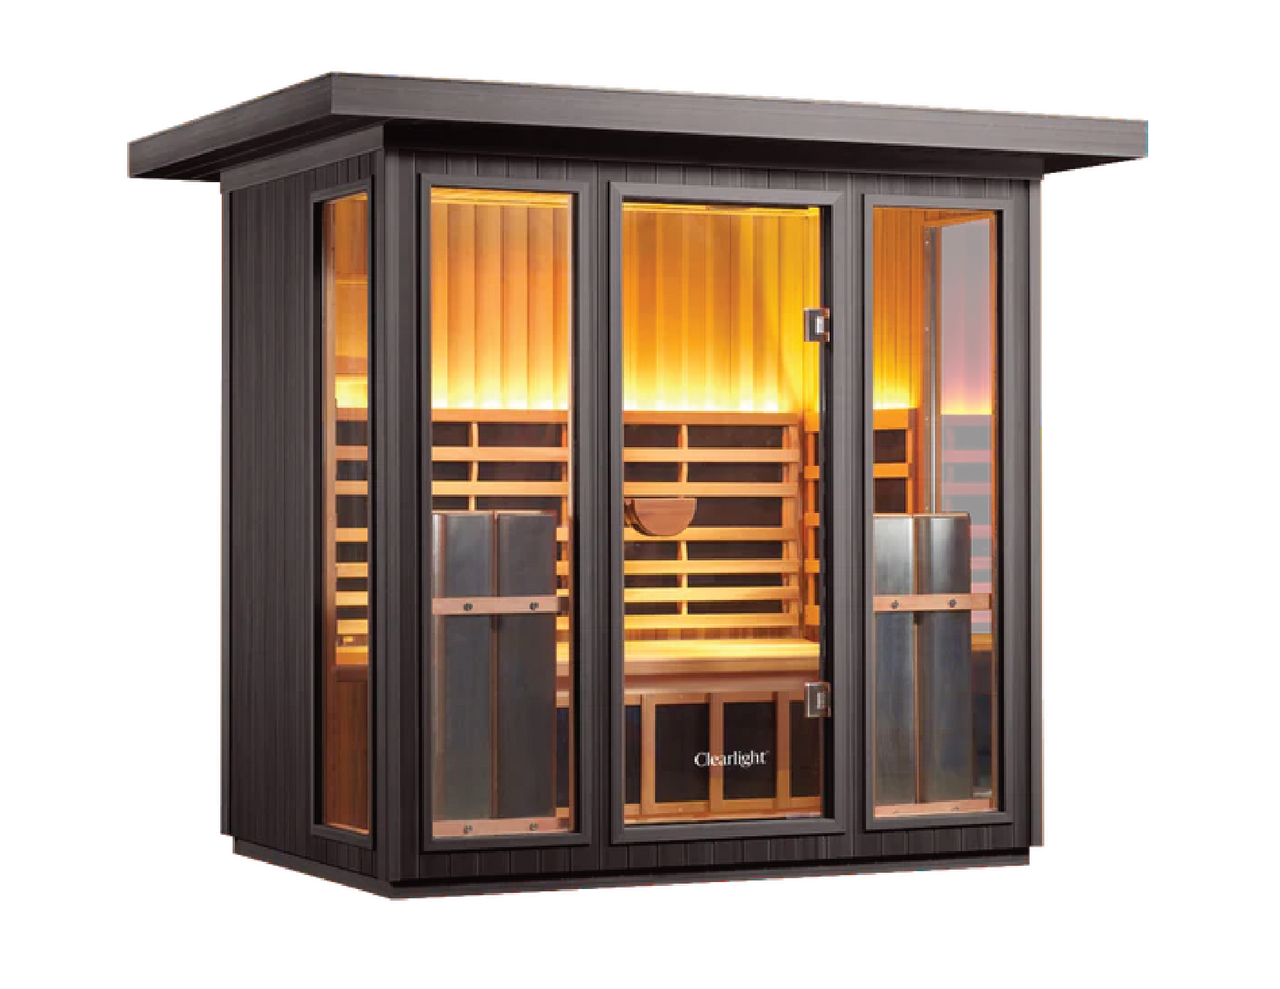 CLEARLIGHT SANCTUARY OUTDOOR 5 4-5 PERSON OUTDOOR FULL SPECTRUM INFRARED SAUNA